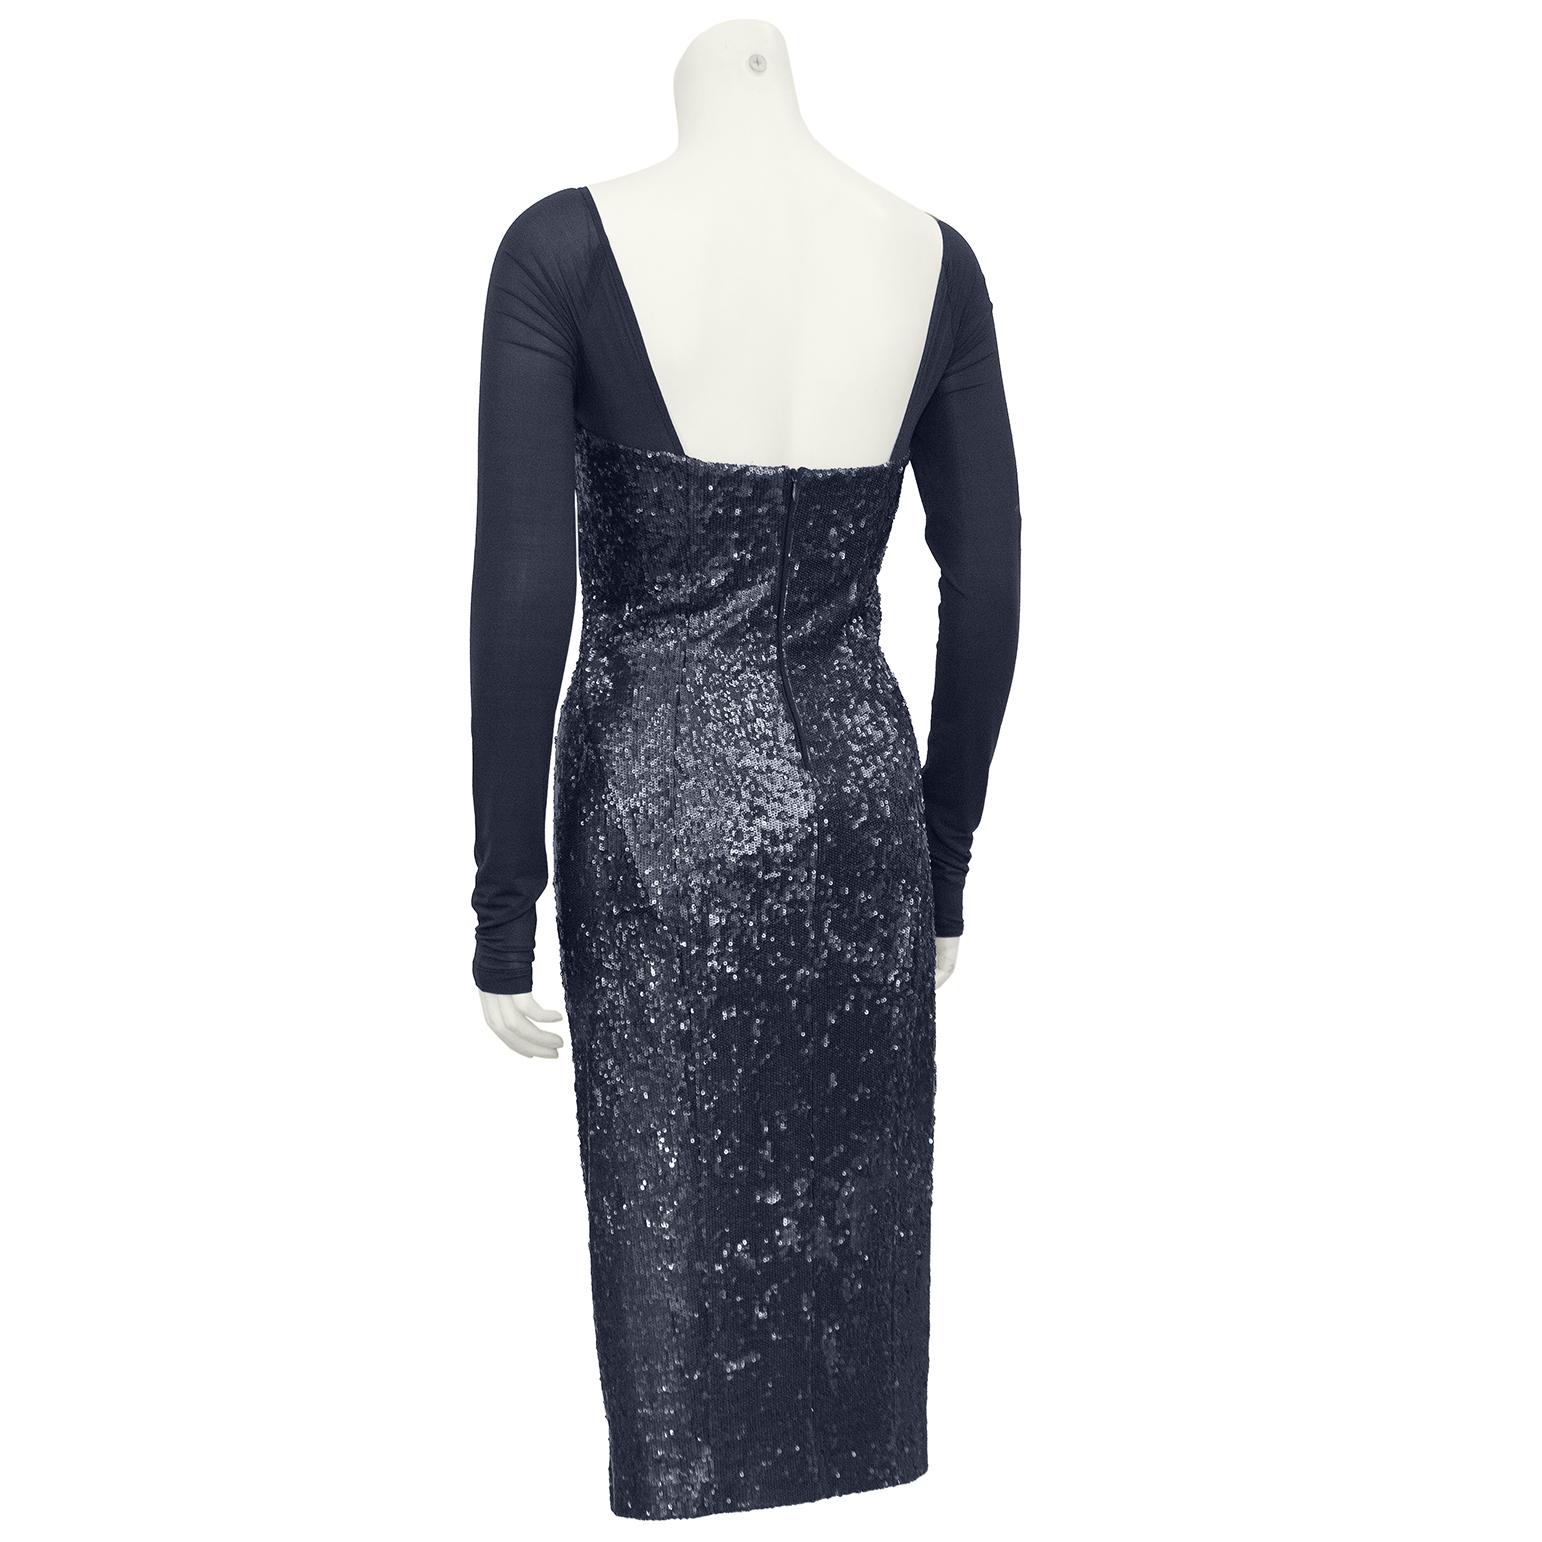 1990s Donna Karan Charcoal Grey Sheer and Sequin Cocktail Dress In Good Condition For Sale In Toronto, Ontario